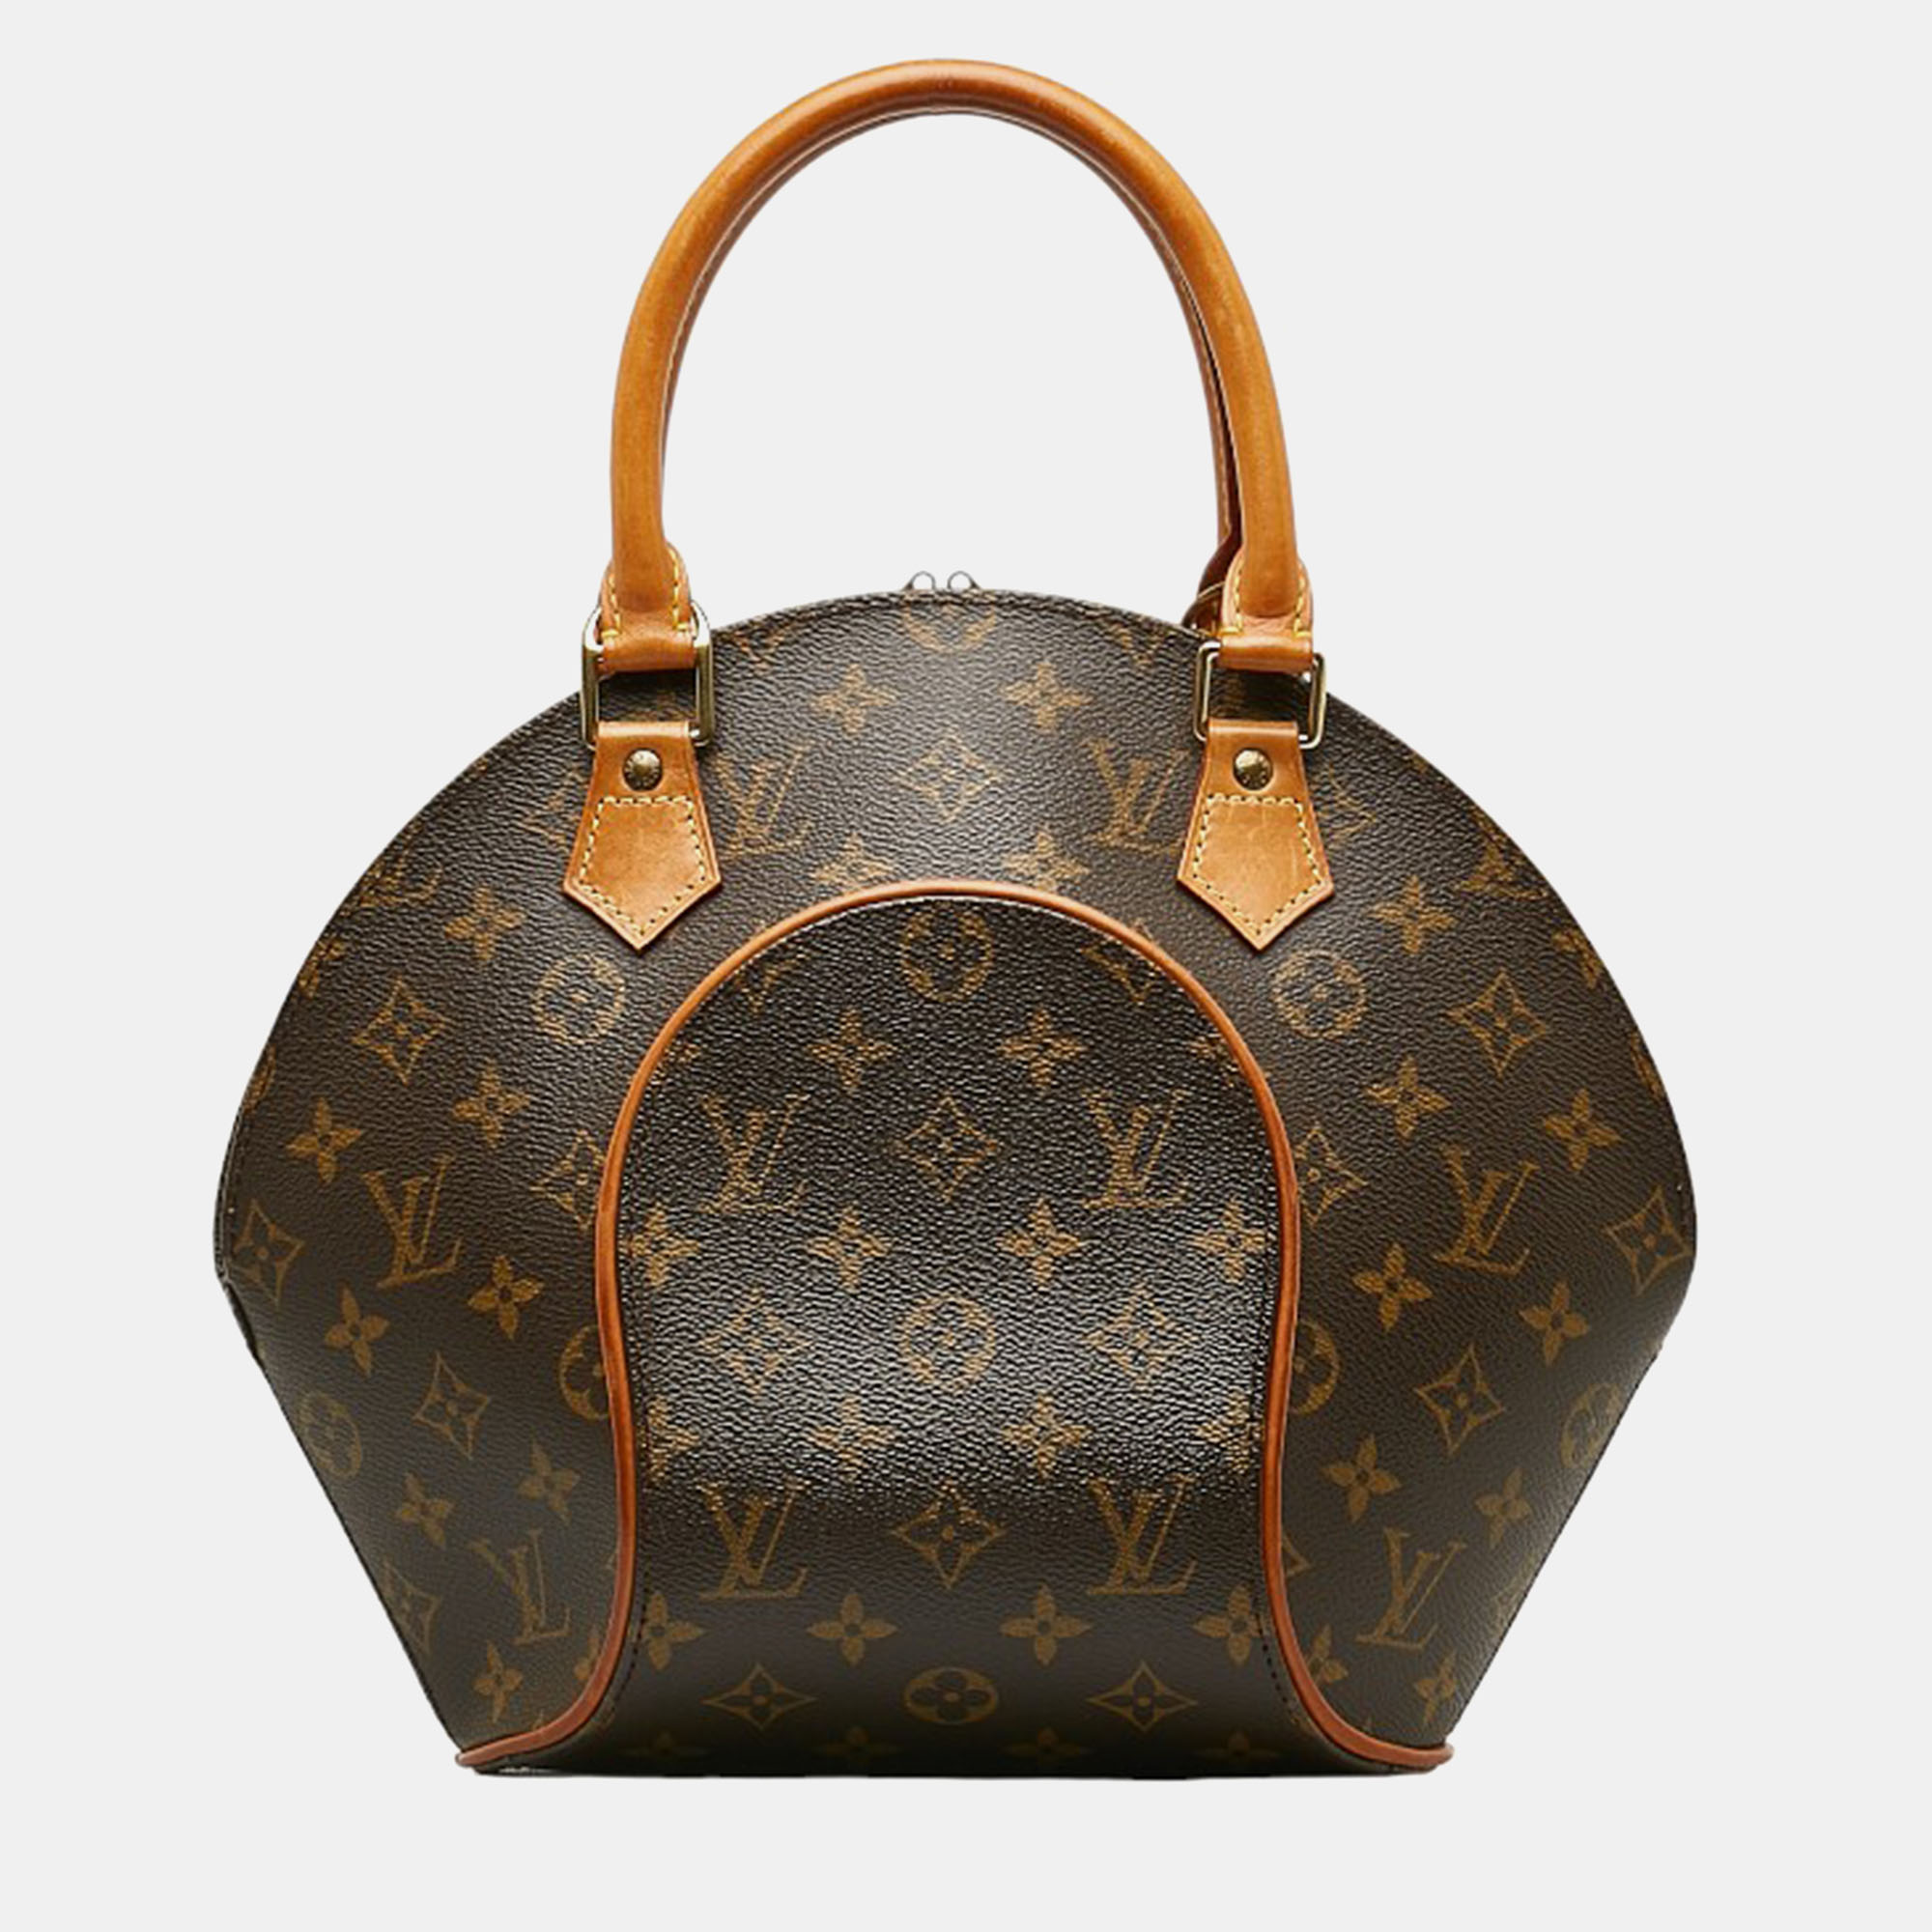 Uncompromising in quality and design this Louis Vuitton bag is a must have in any wardrobe. With its durable construction and luxurious finish its the perfect accessory for any occasion.